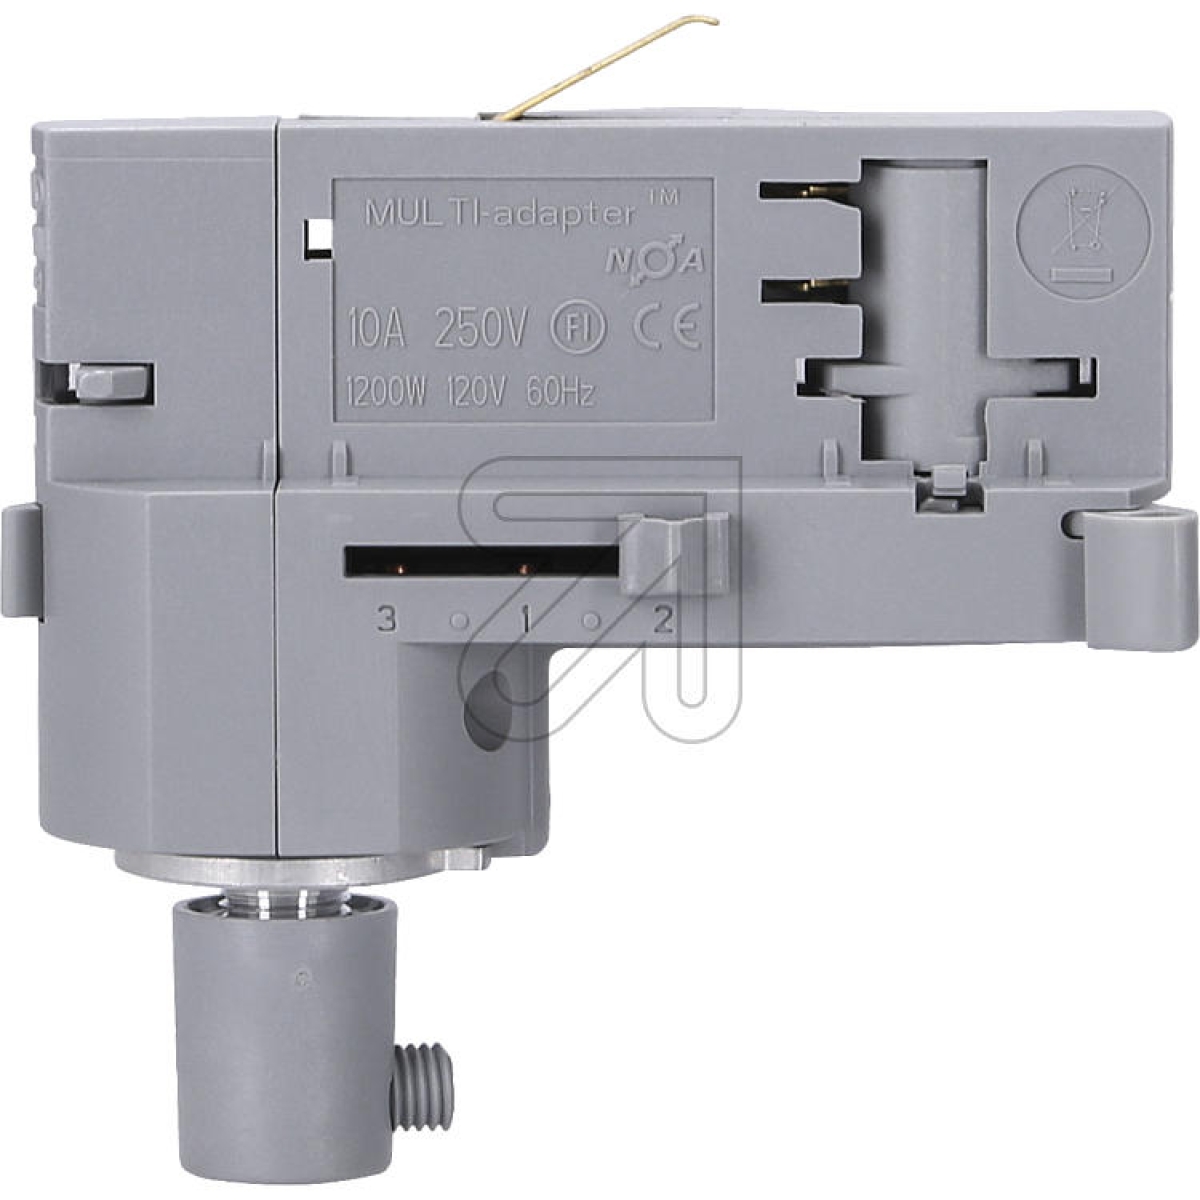 Global TracEuro adapter for 3-phase track GA100-1, gray max. 10A/100NArticle-No: 667260